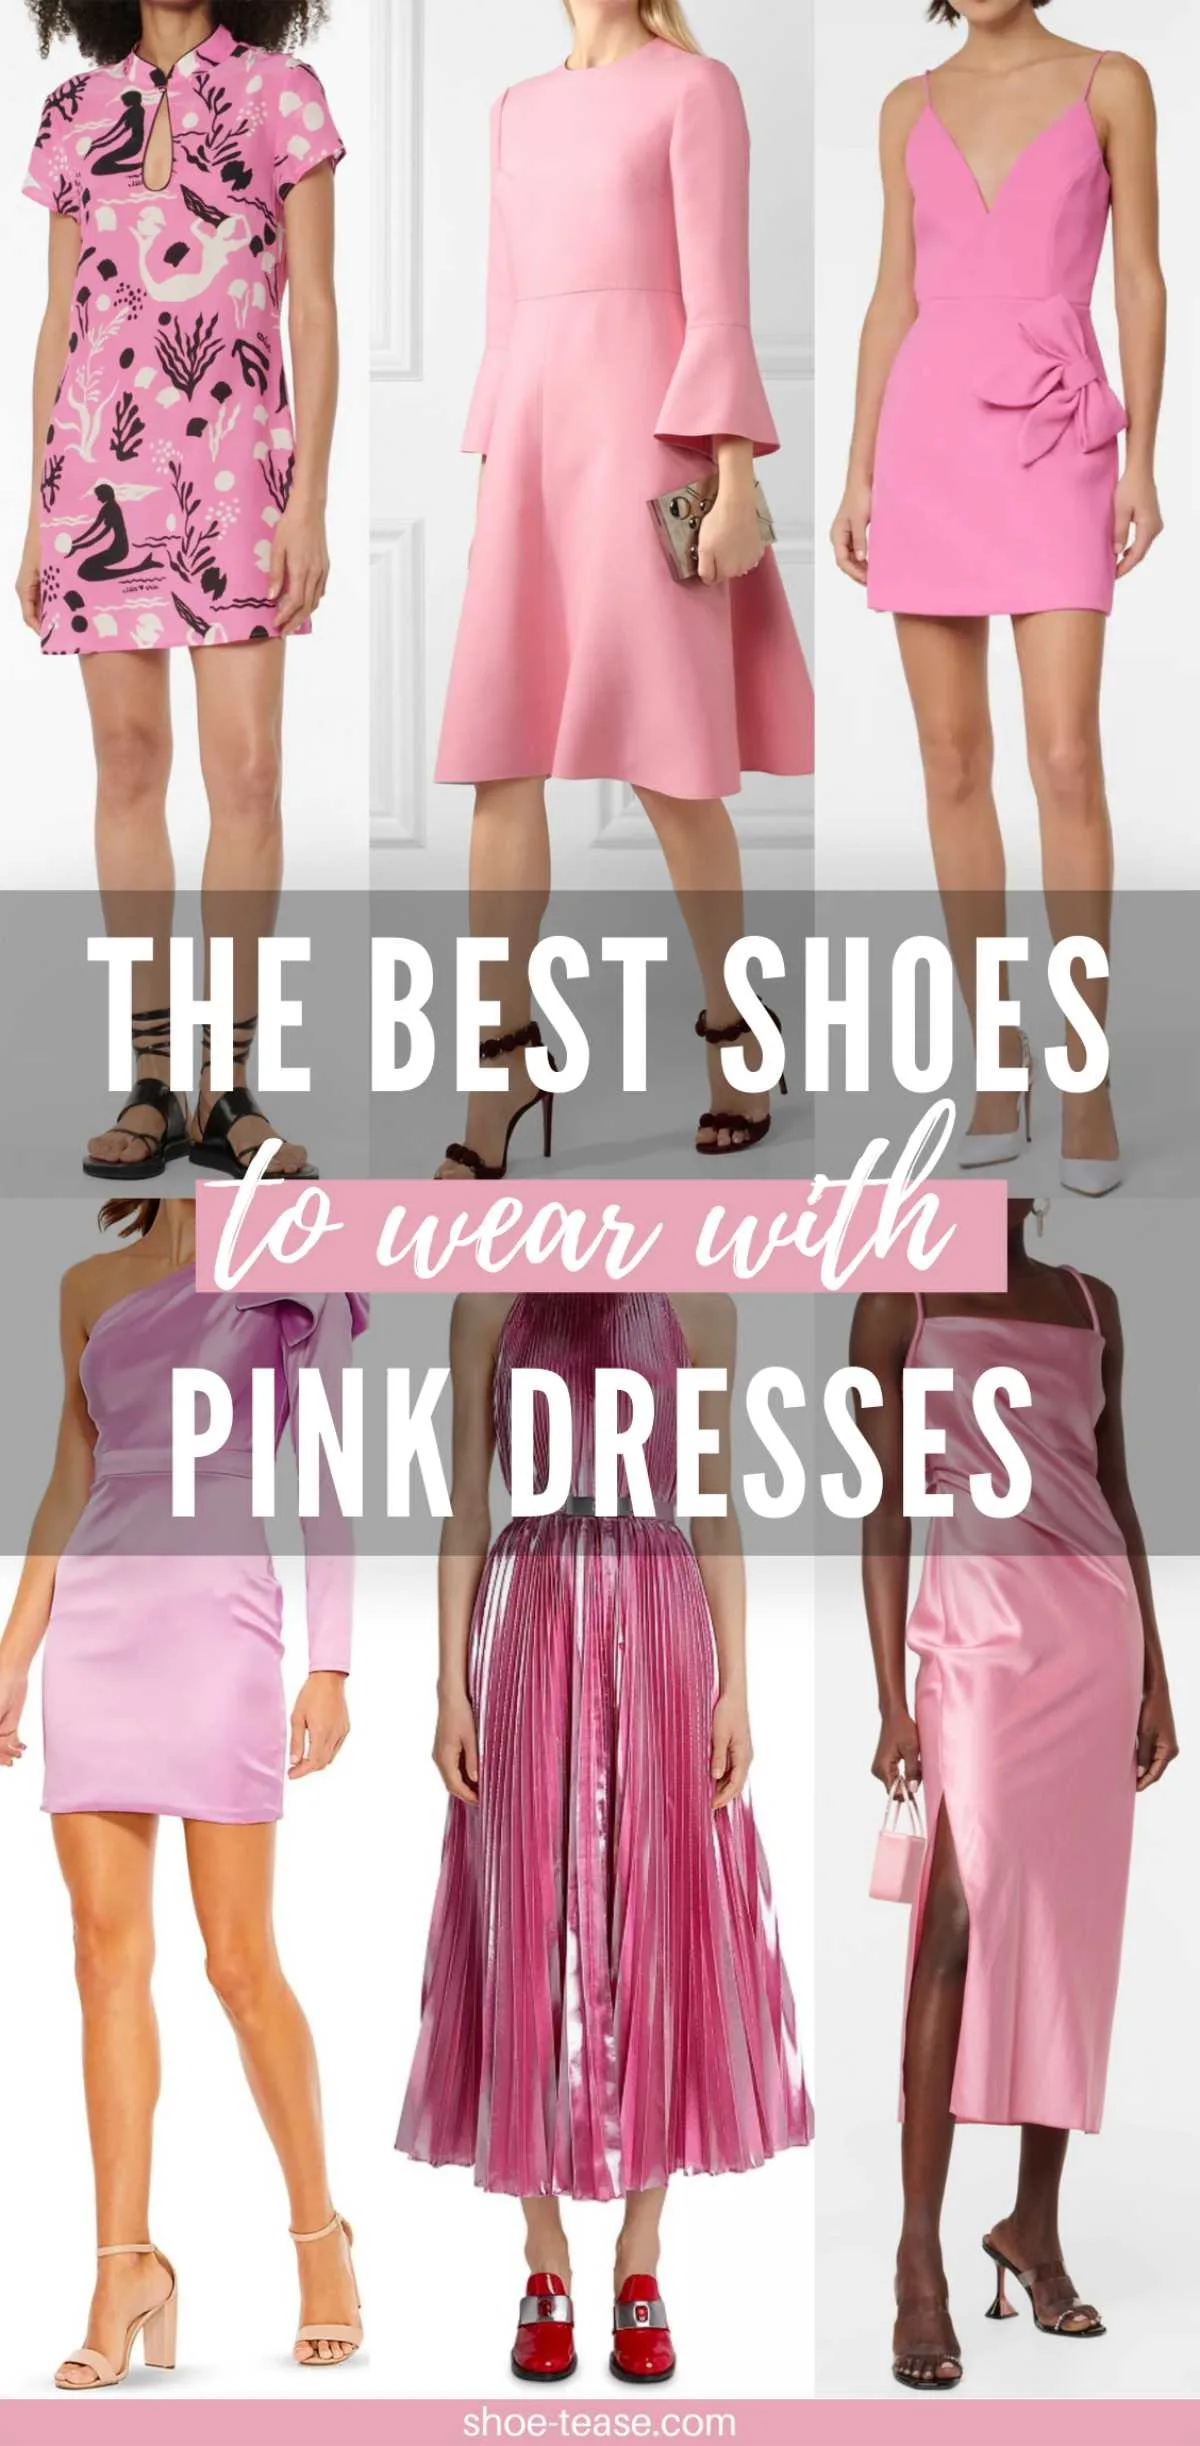 6 women wearing different pink dresses with different color shoes.